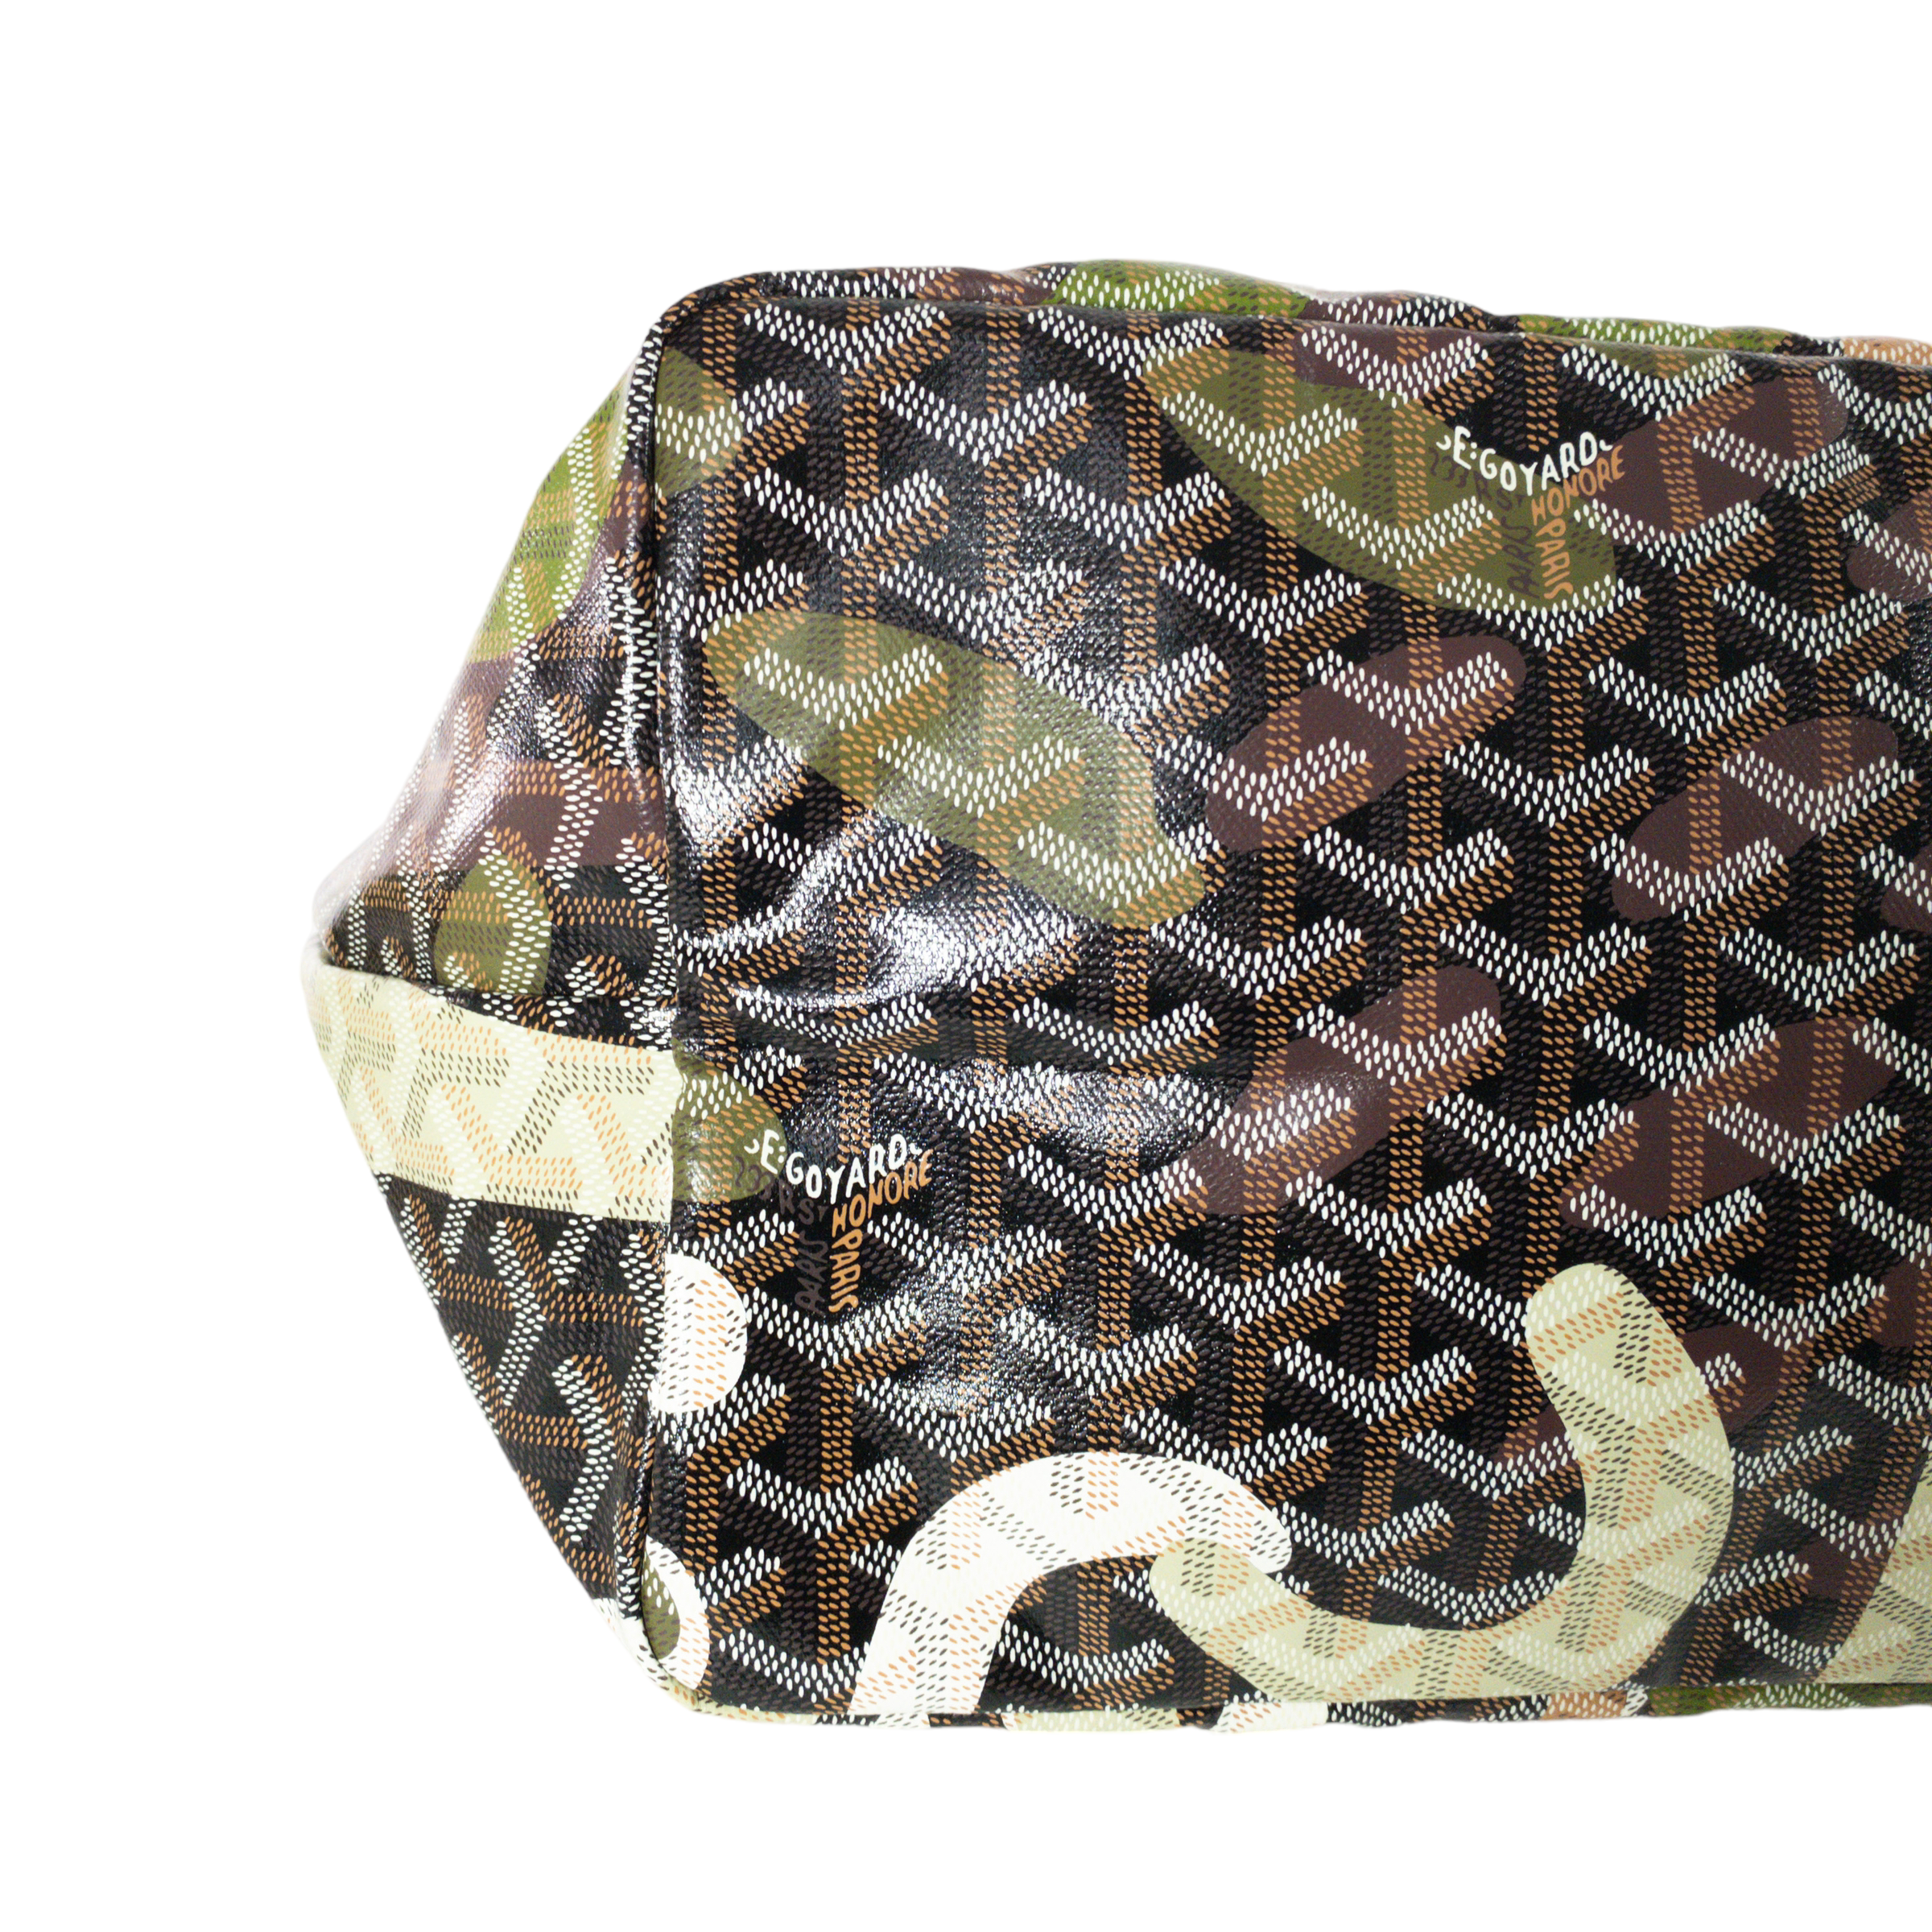 NEW! GOYARD Saint Louis PM Lettres Camouflage LIMITED EDITION Bags